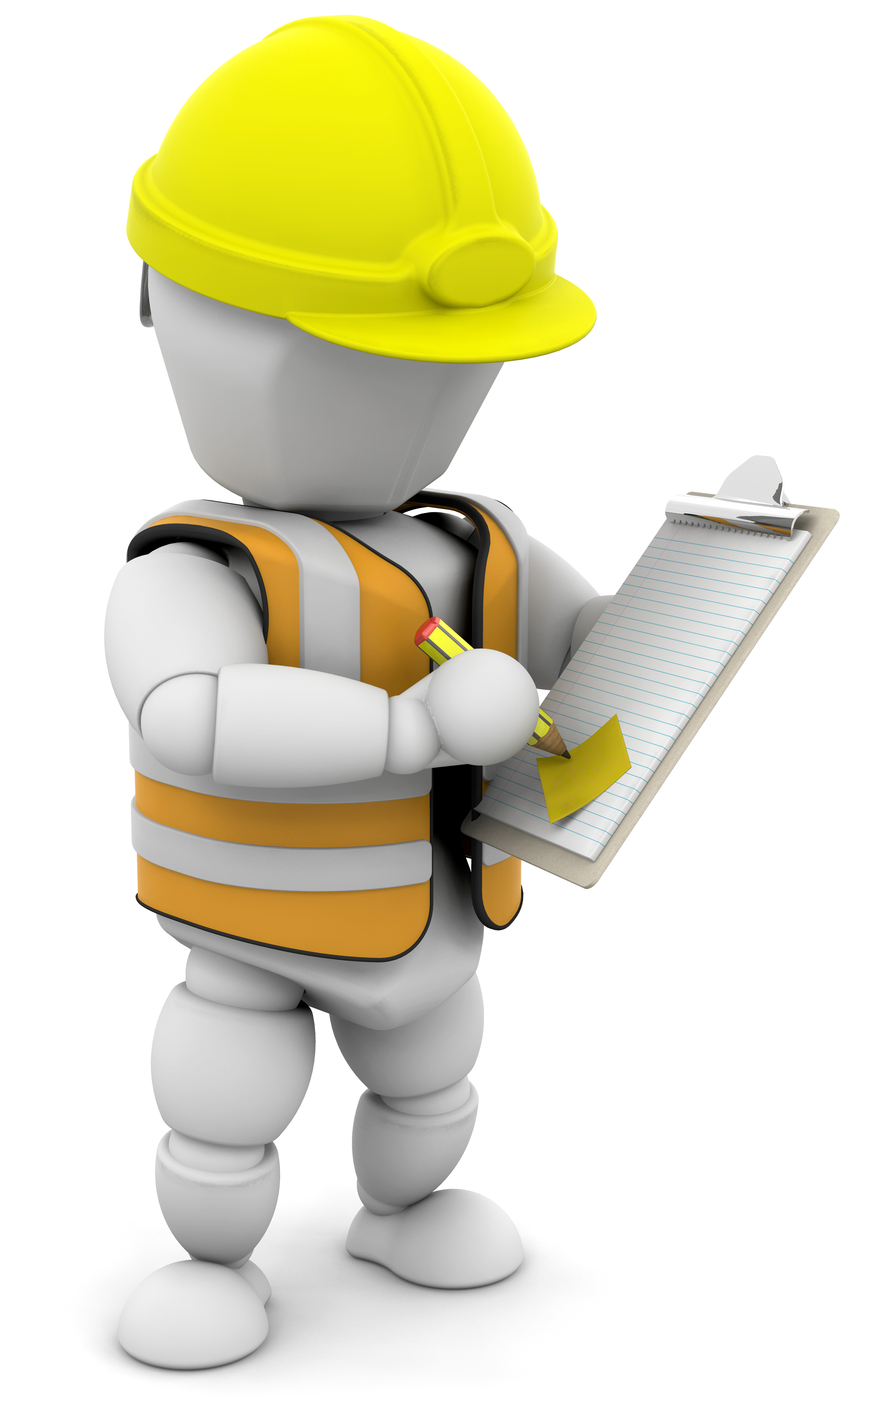 Clipart Illustration Of A White Character In A Hardhat And Vest